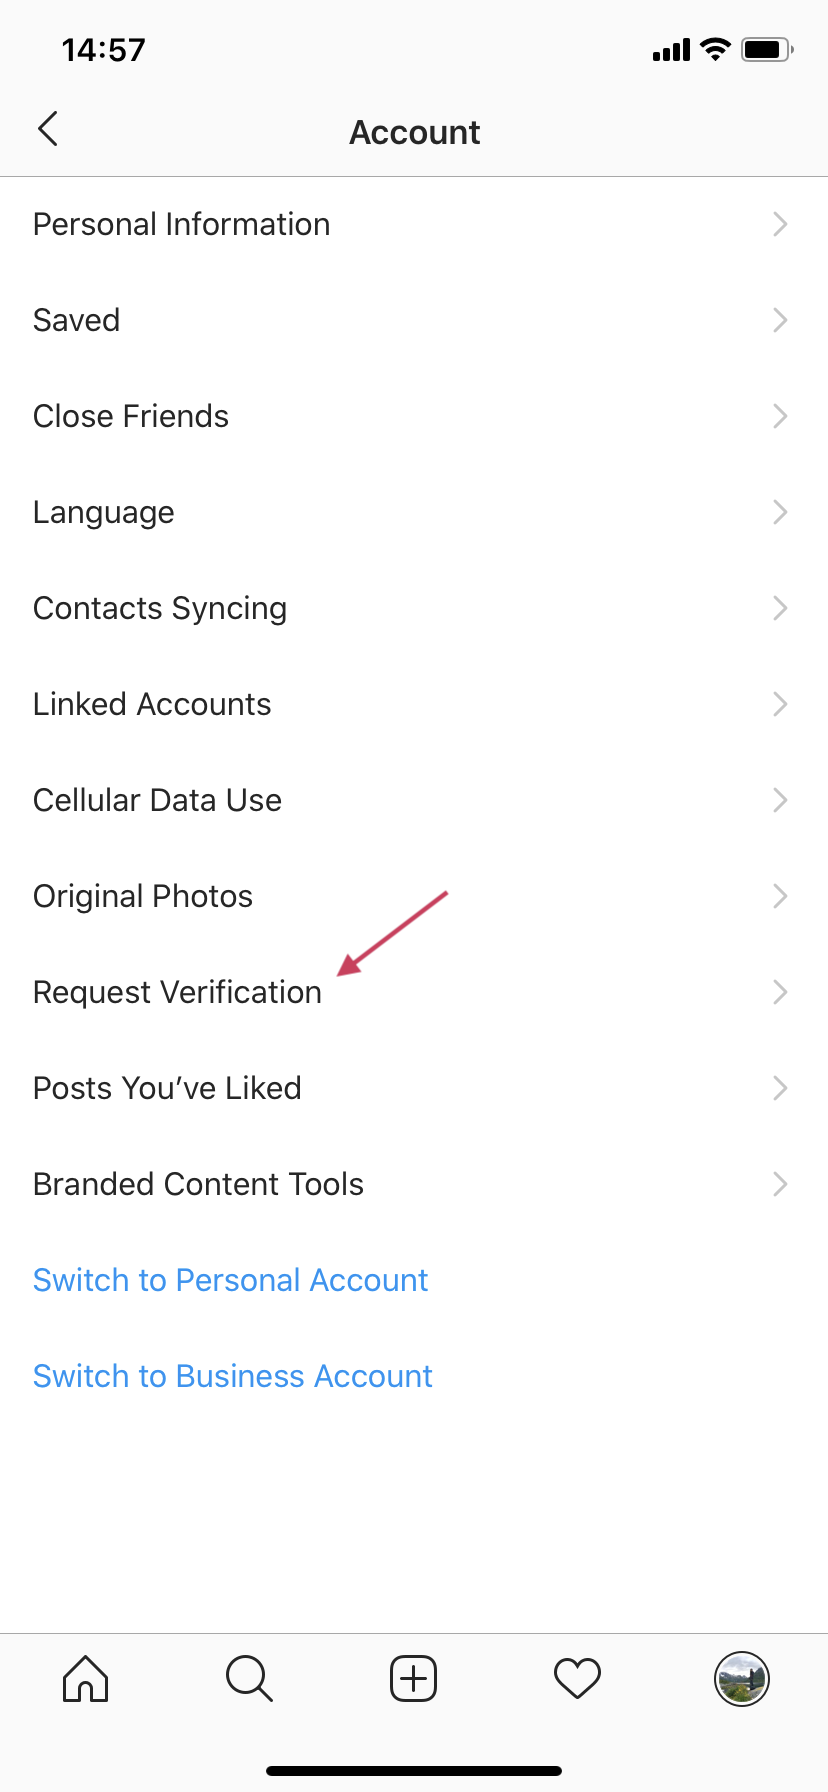 How to get verified on Instagram